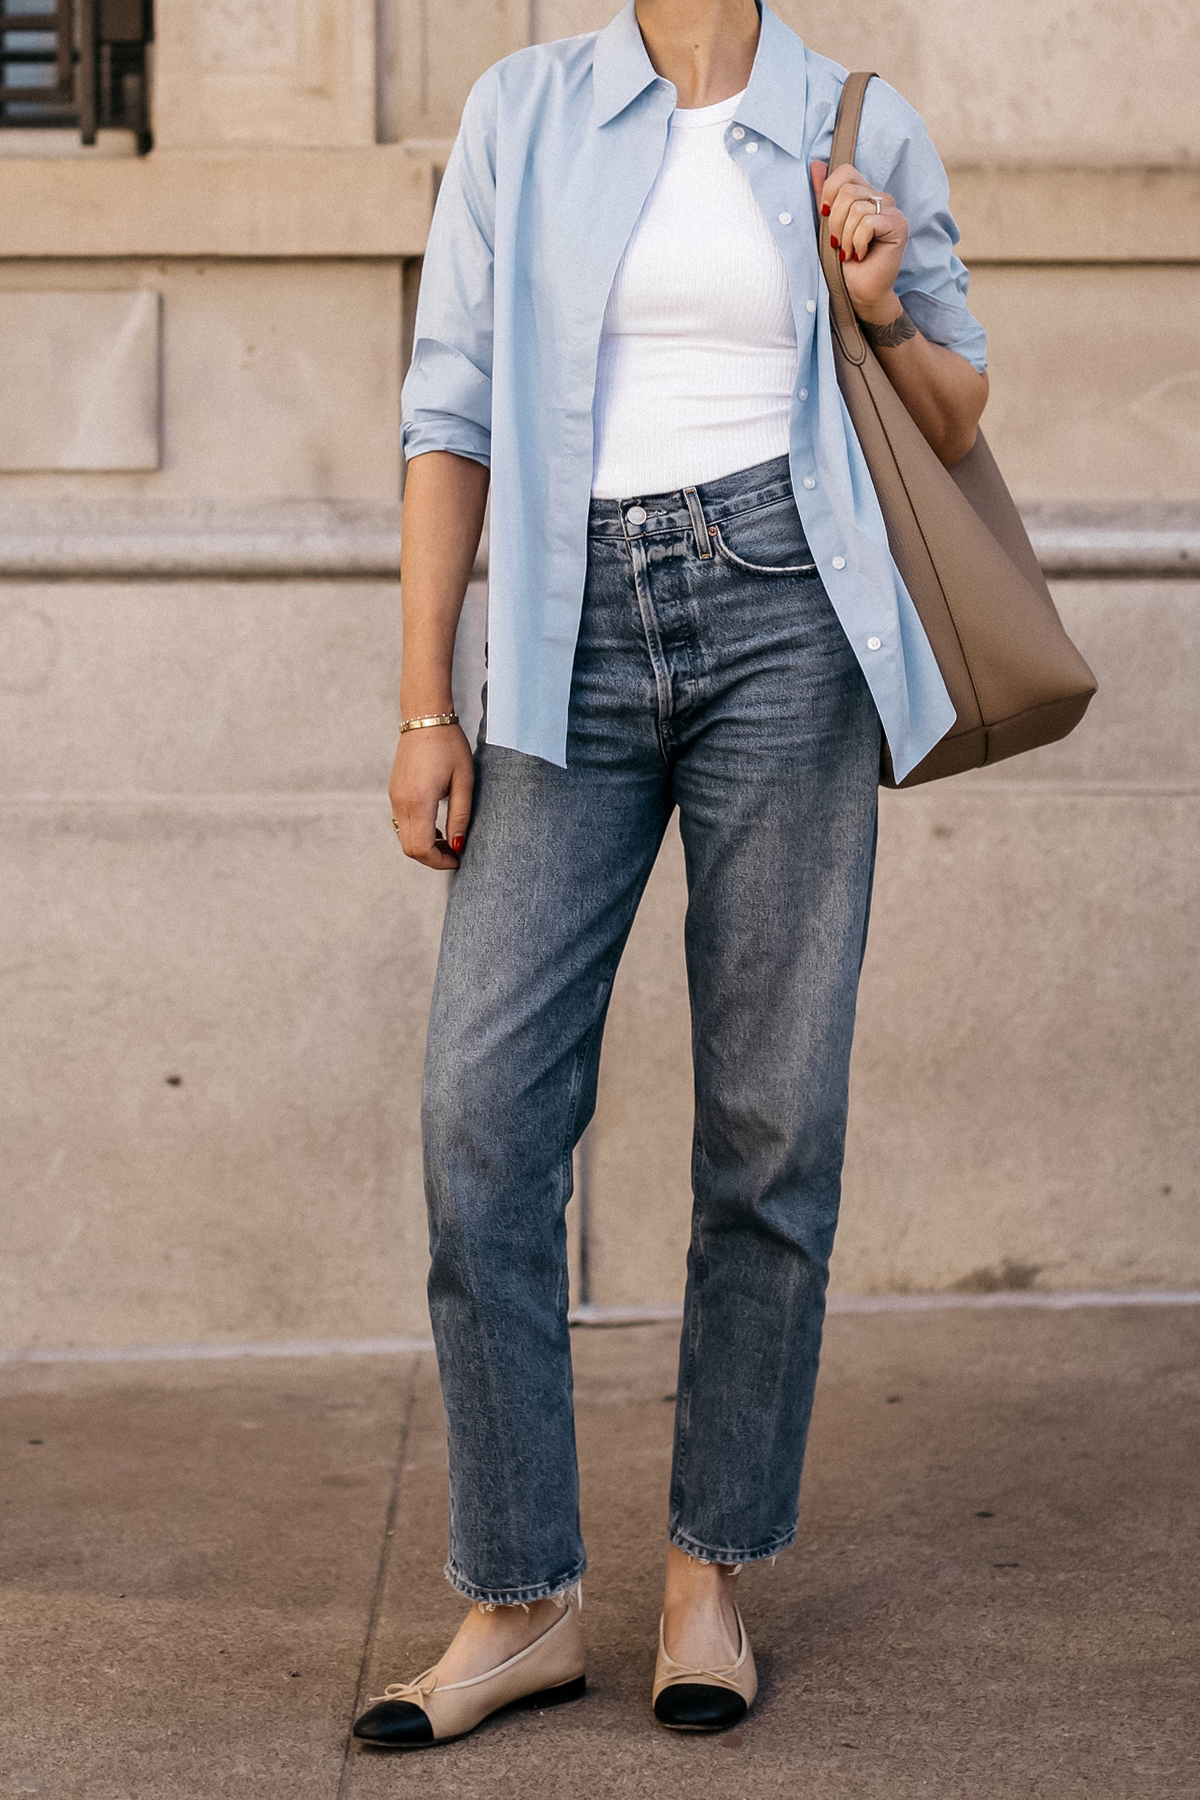 Fashion Jackson Wearing MAYSON the label Blue Button Up Shirt White Tank AGOLDE Jeans Chanel Ballerina Flats Tan and Black The Row NS Large Tote Taupe Casual Street Style Spring Outfit 2